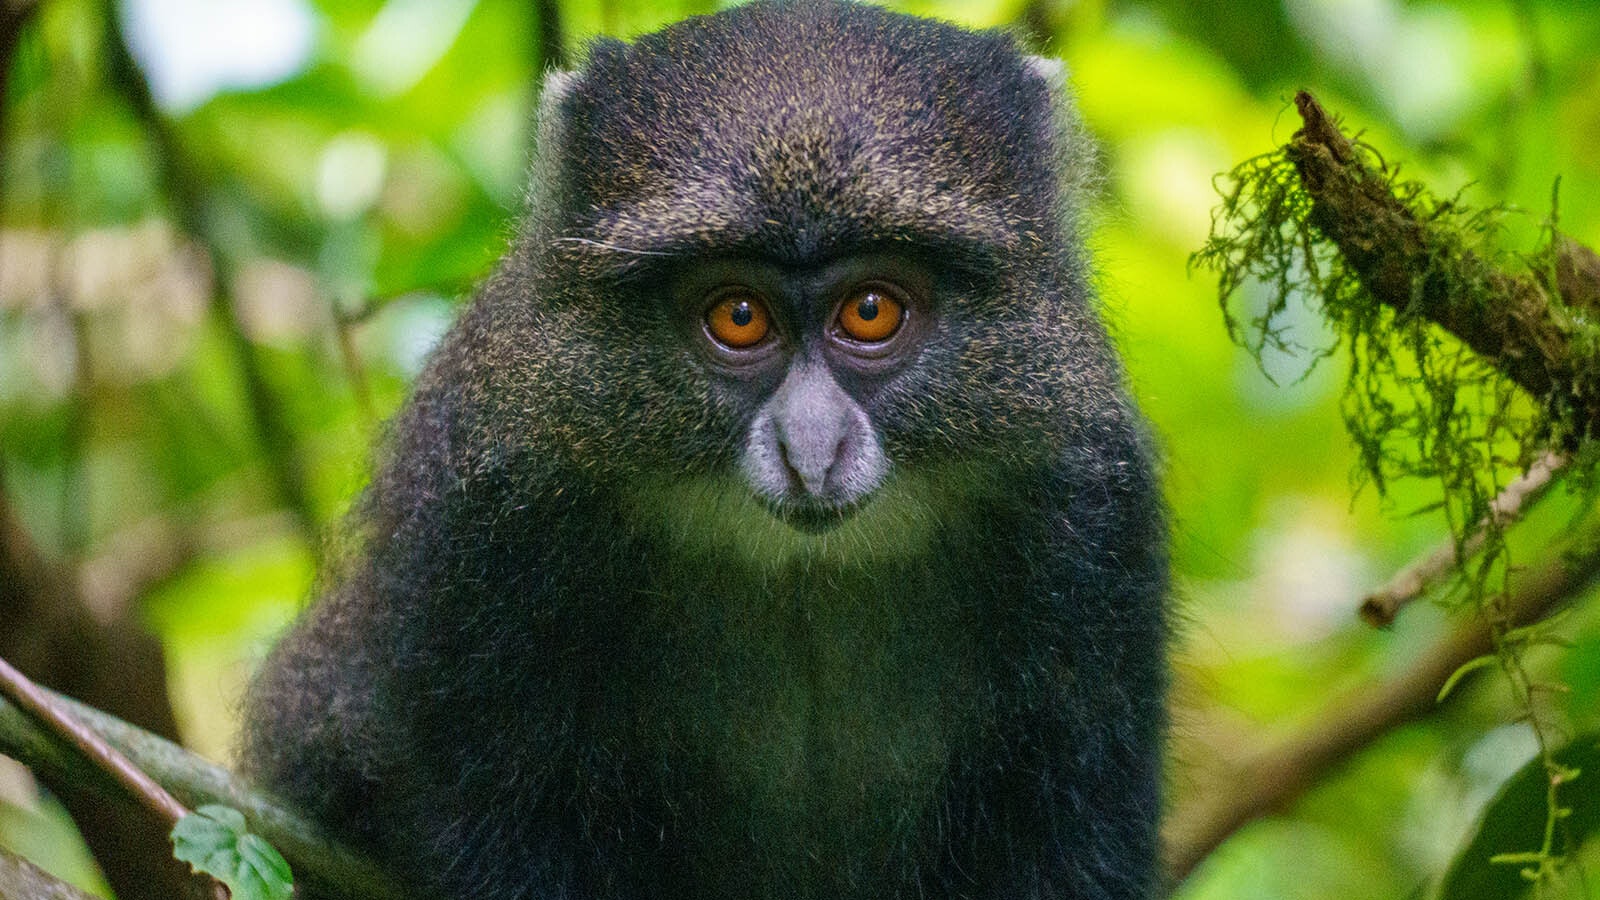 Around the base of Kilimanjaro is a rainforest, where Chris Clifton met this curious monkey.